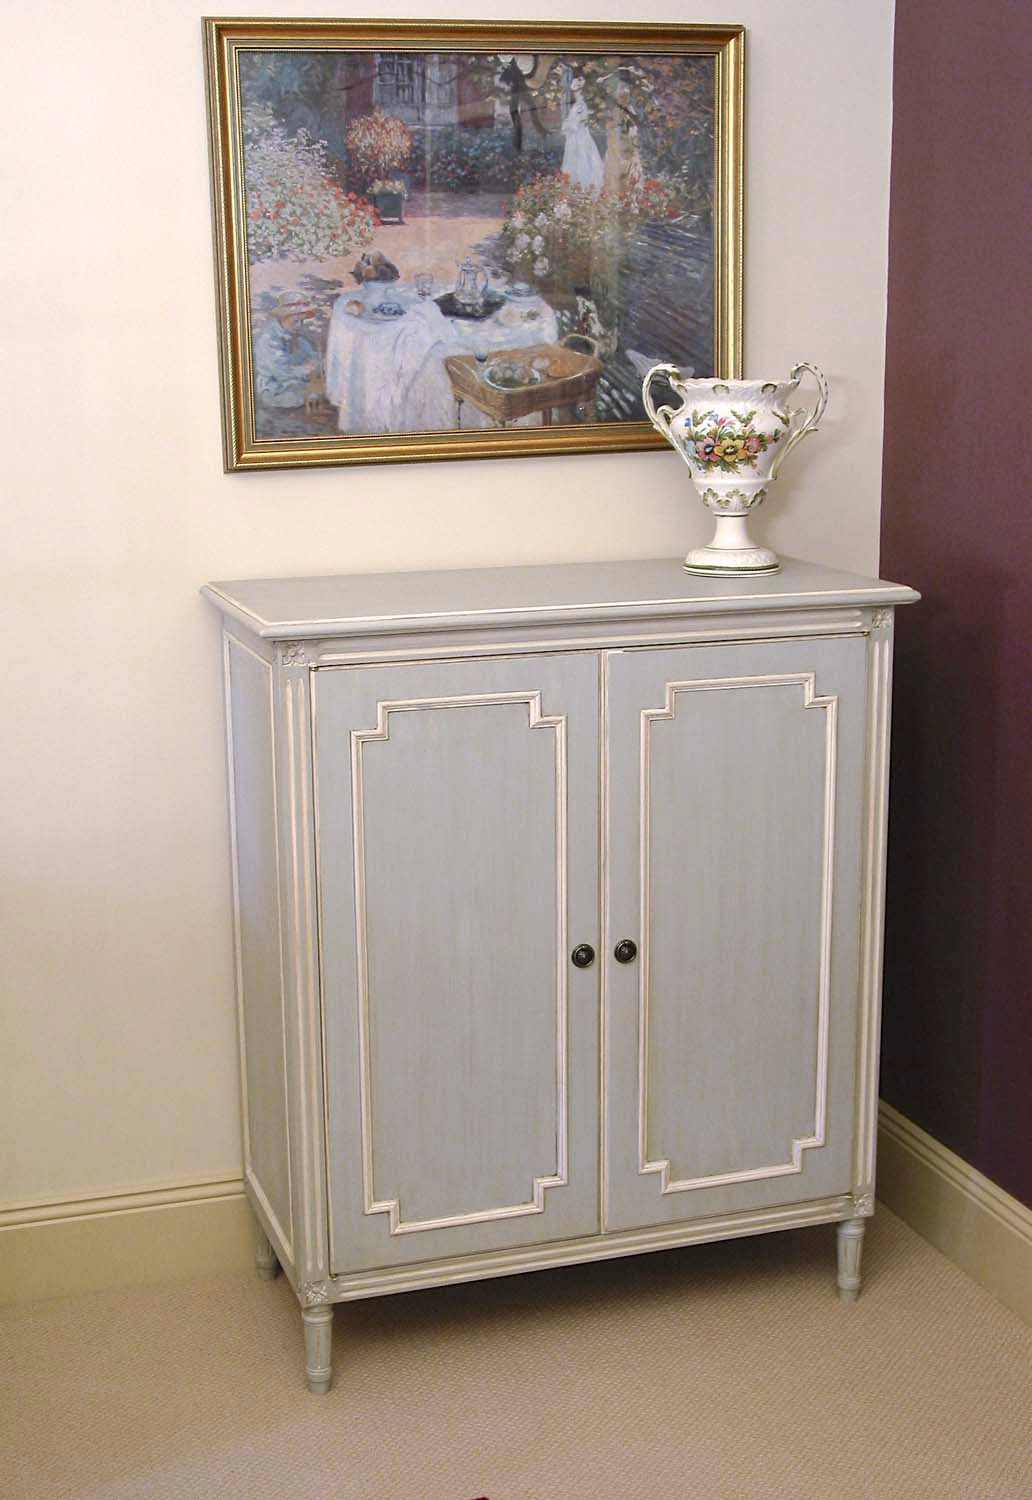 35 French classical and provincial furniture painted finishes